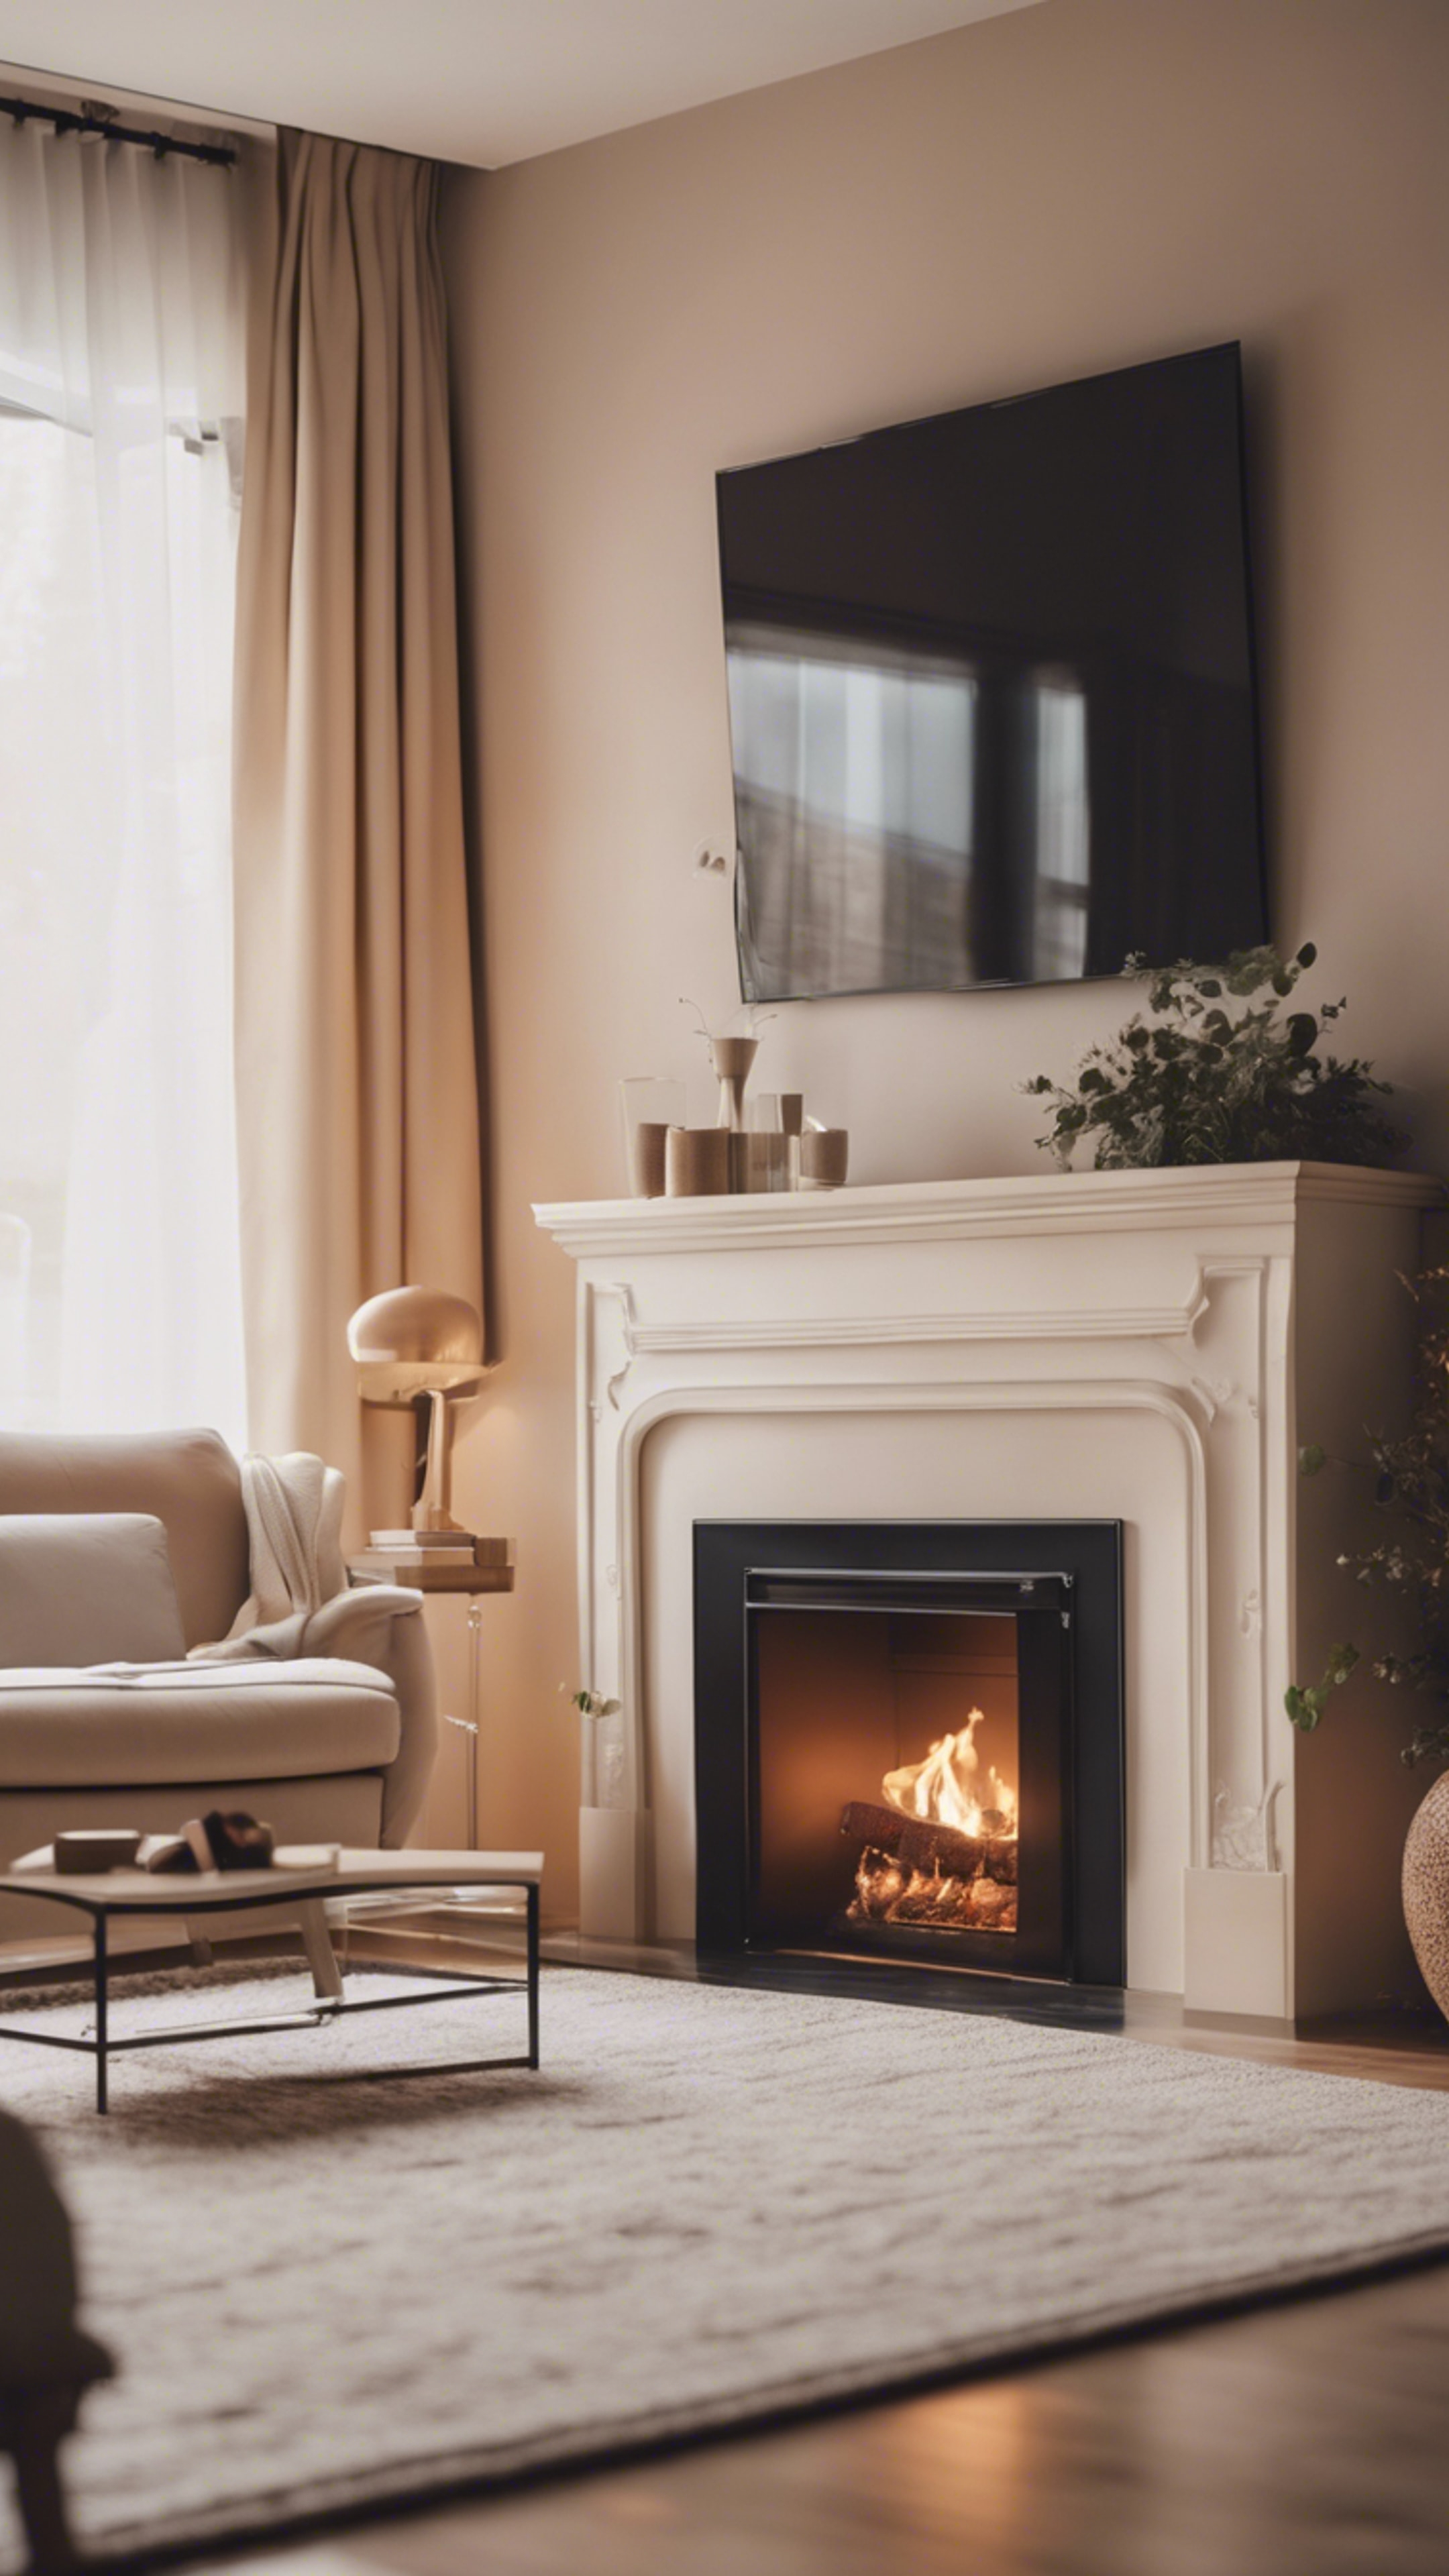 A cozy and tranquil cool beige living room with a fireplace alive with dancing flames.壁紙[fdd7e3460c134e479b57]